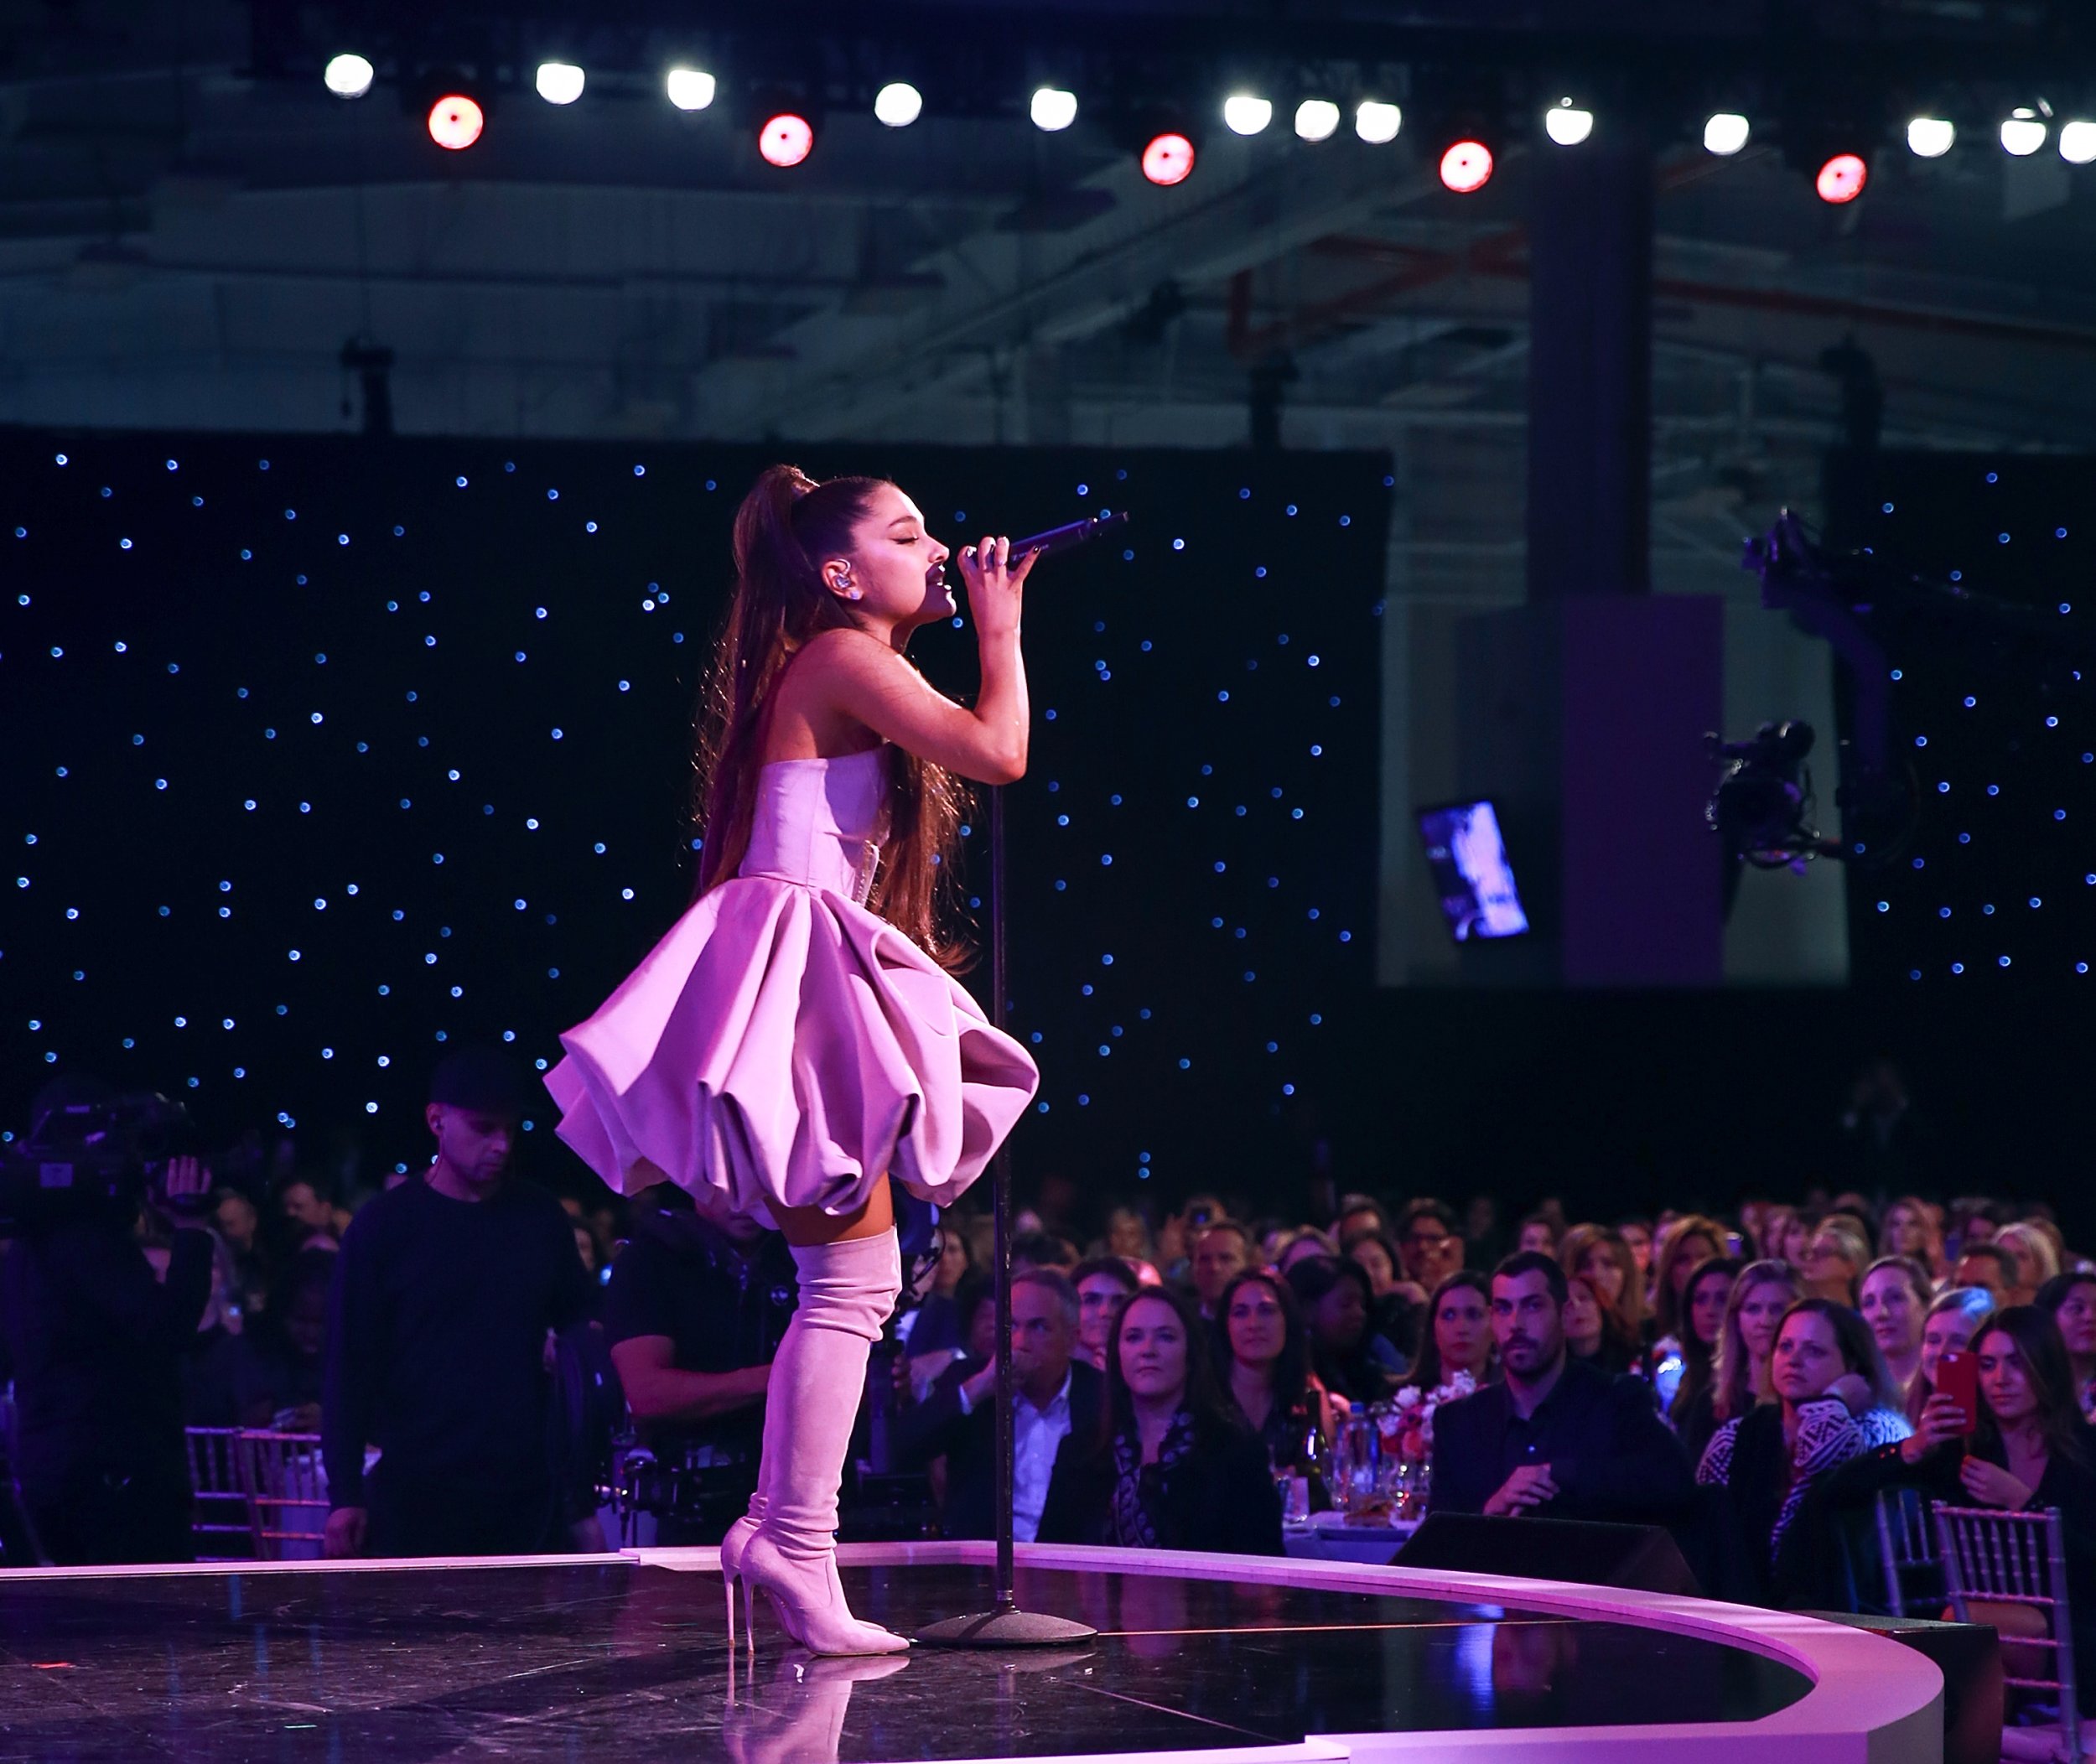 Ariana Grande On Stage Purple Cloud Dress At Ariana Grande Concert